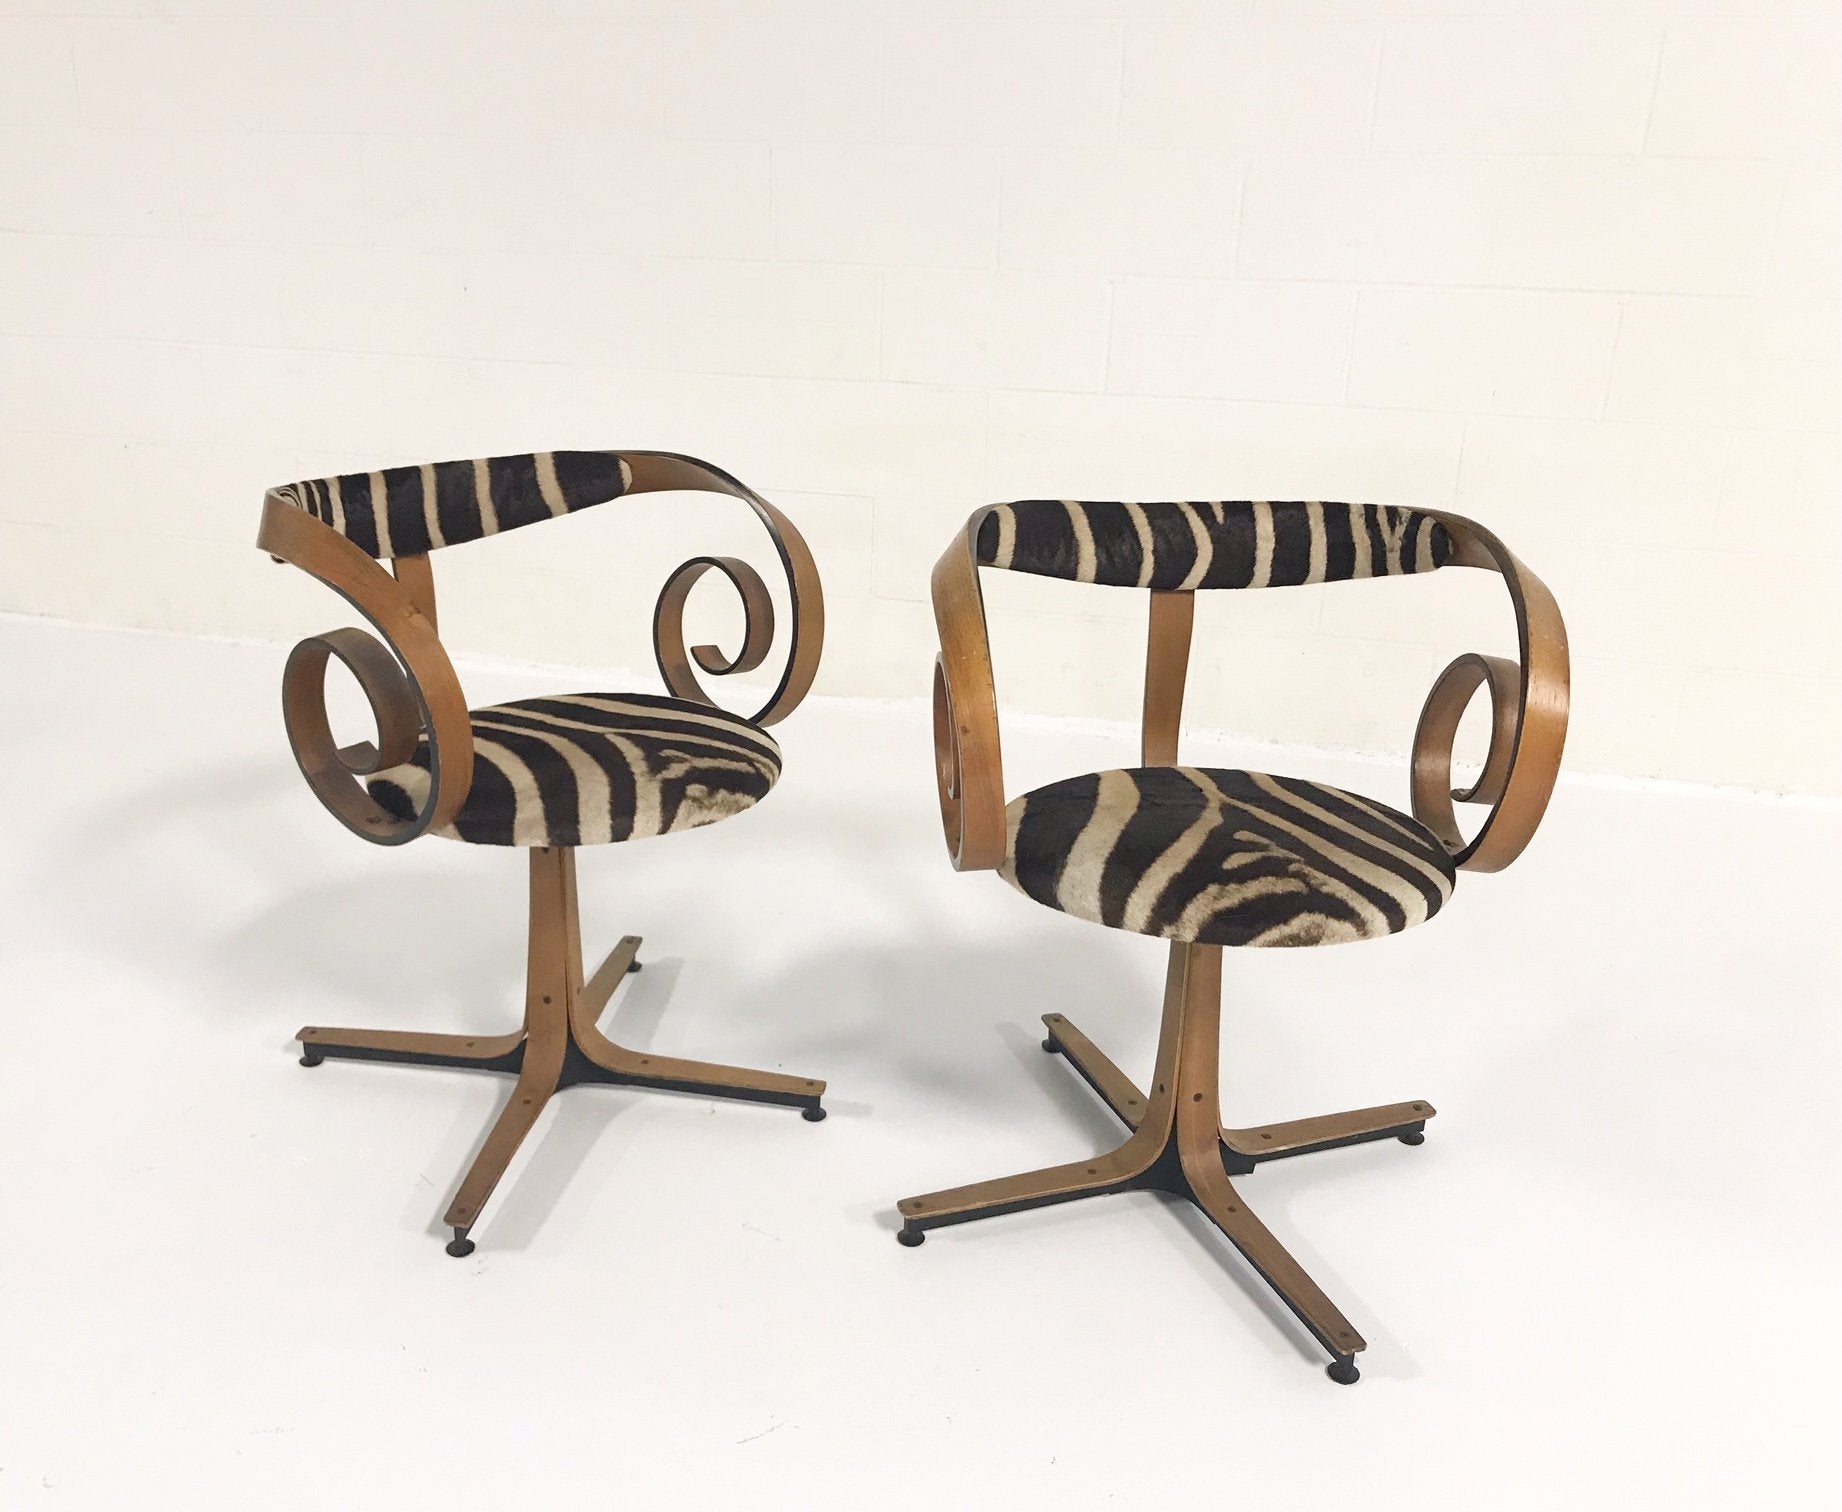 Sultana Chairs in Zebra Hide, pair - FORSYTH